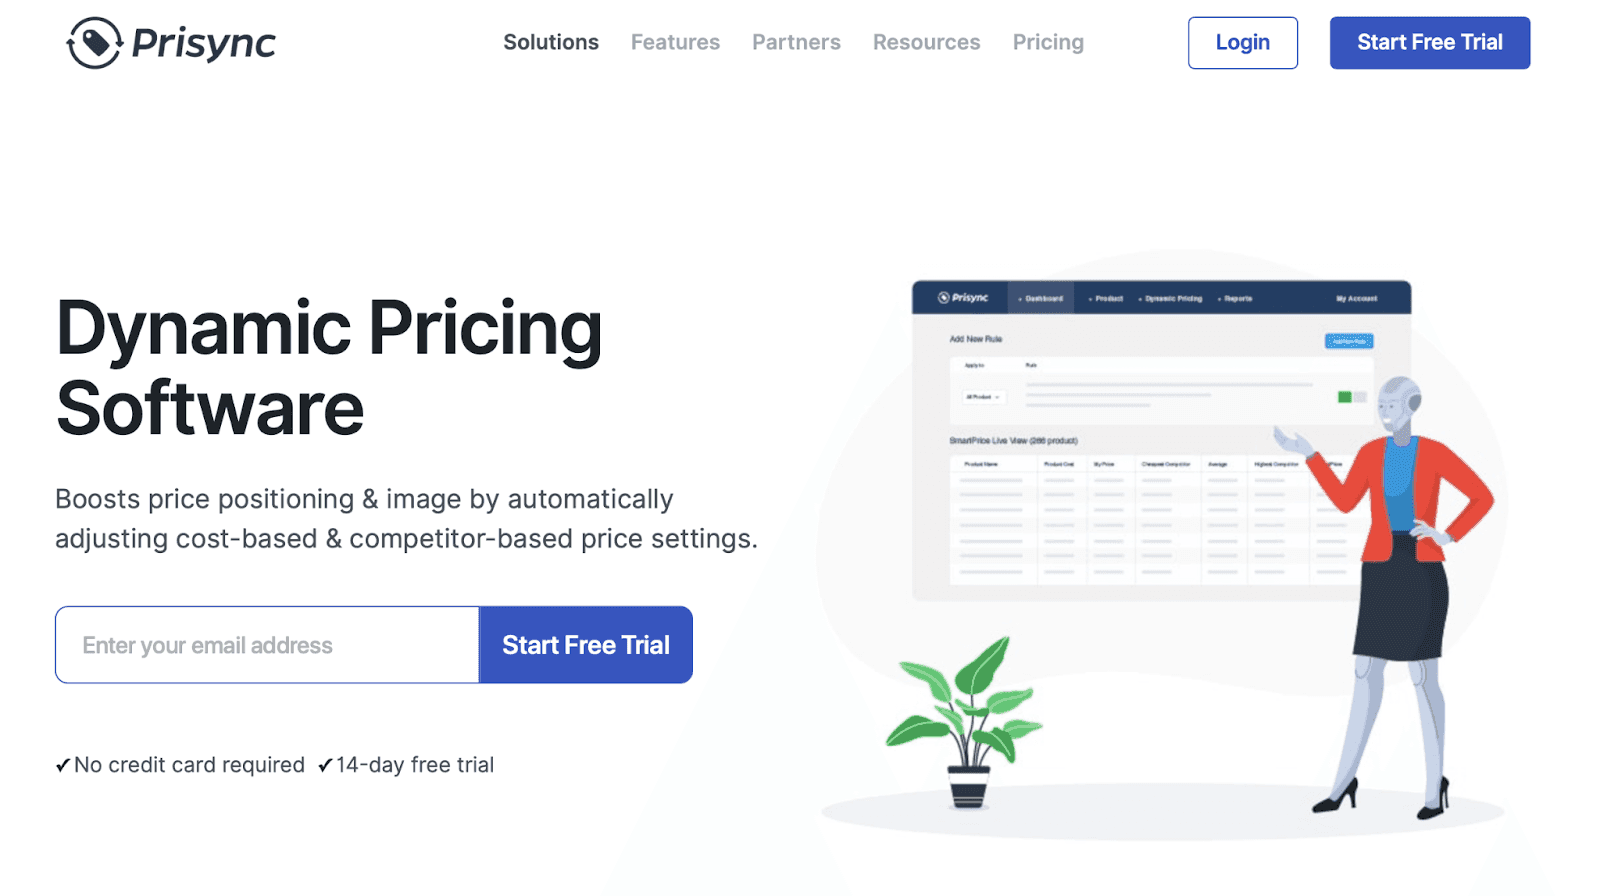 Dynamic Pricing Software - Boosts price positioning & image by automatically adjusting cost-based & competitor-based price settings